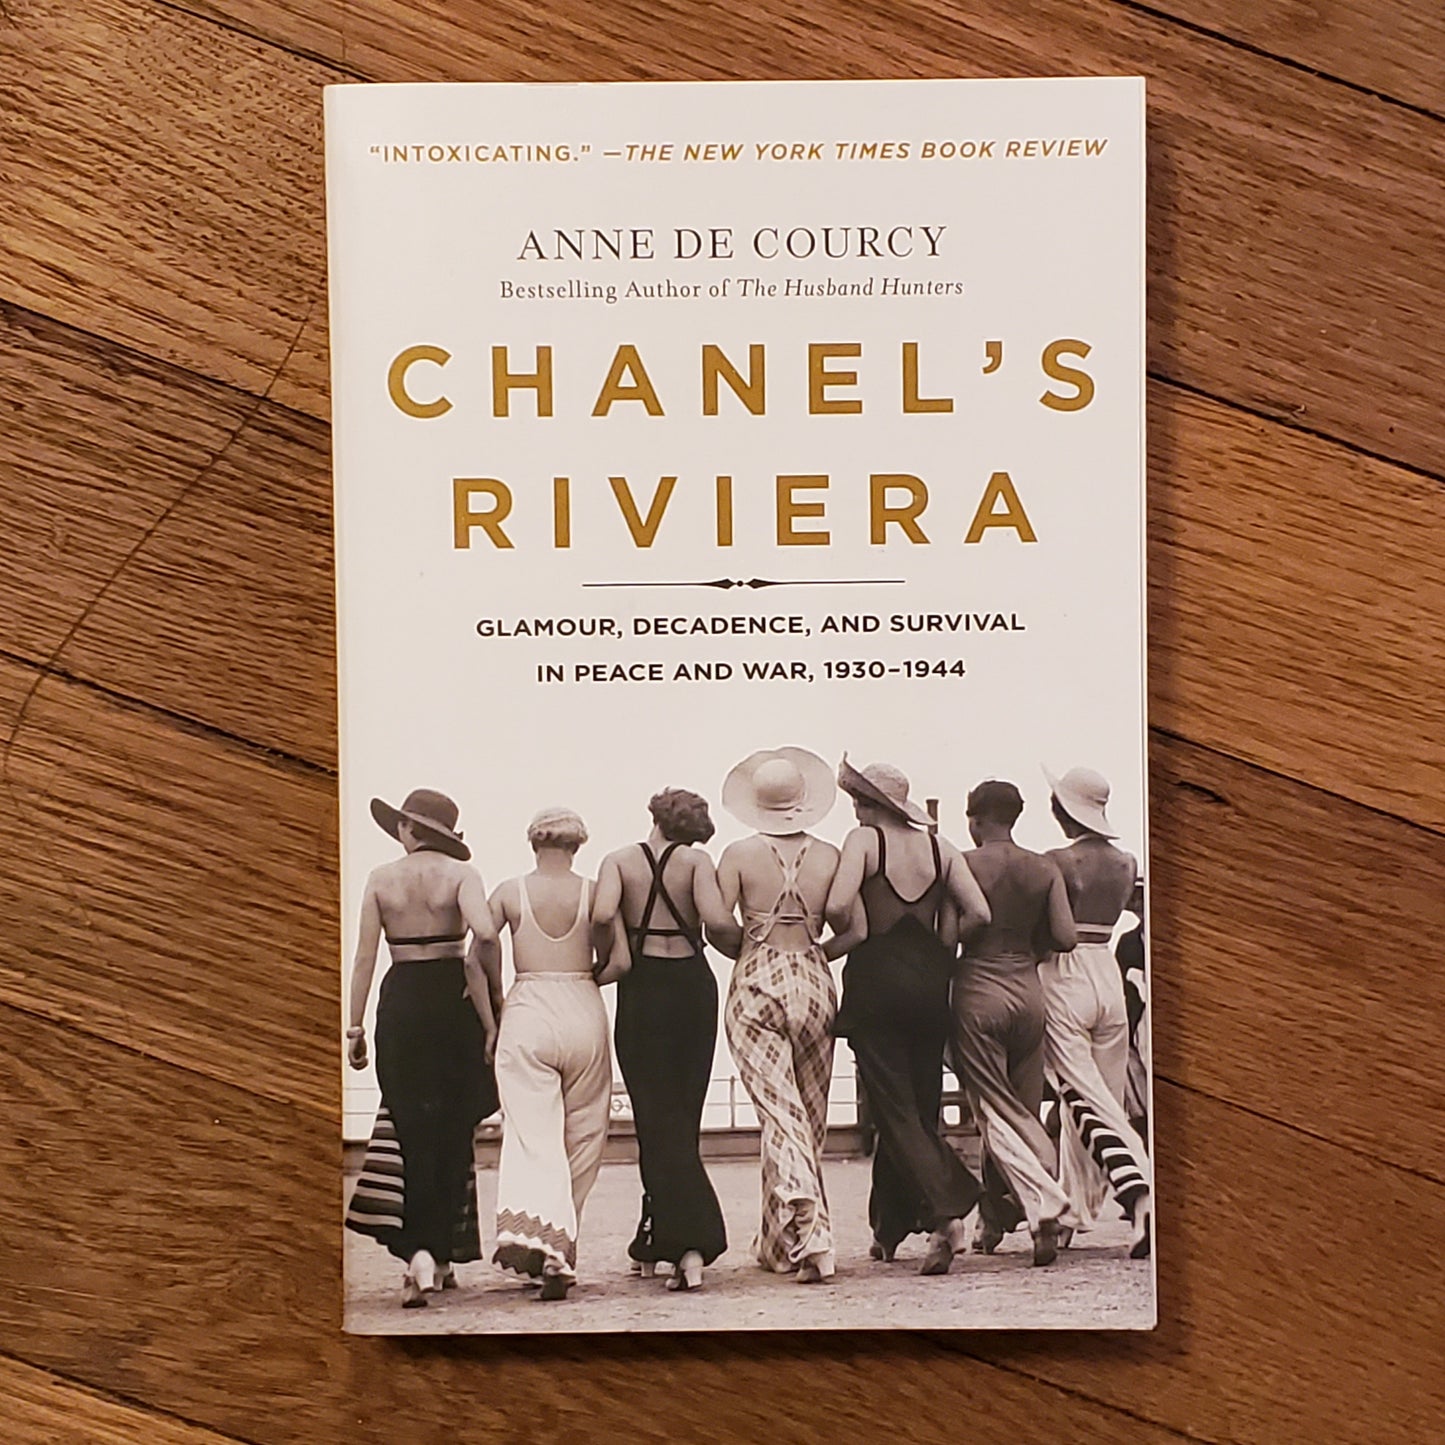 GB Chanel's Riviera: Glamour, Decadence, and Survival in Peace and War, 1930-1944